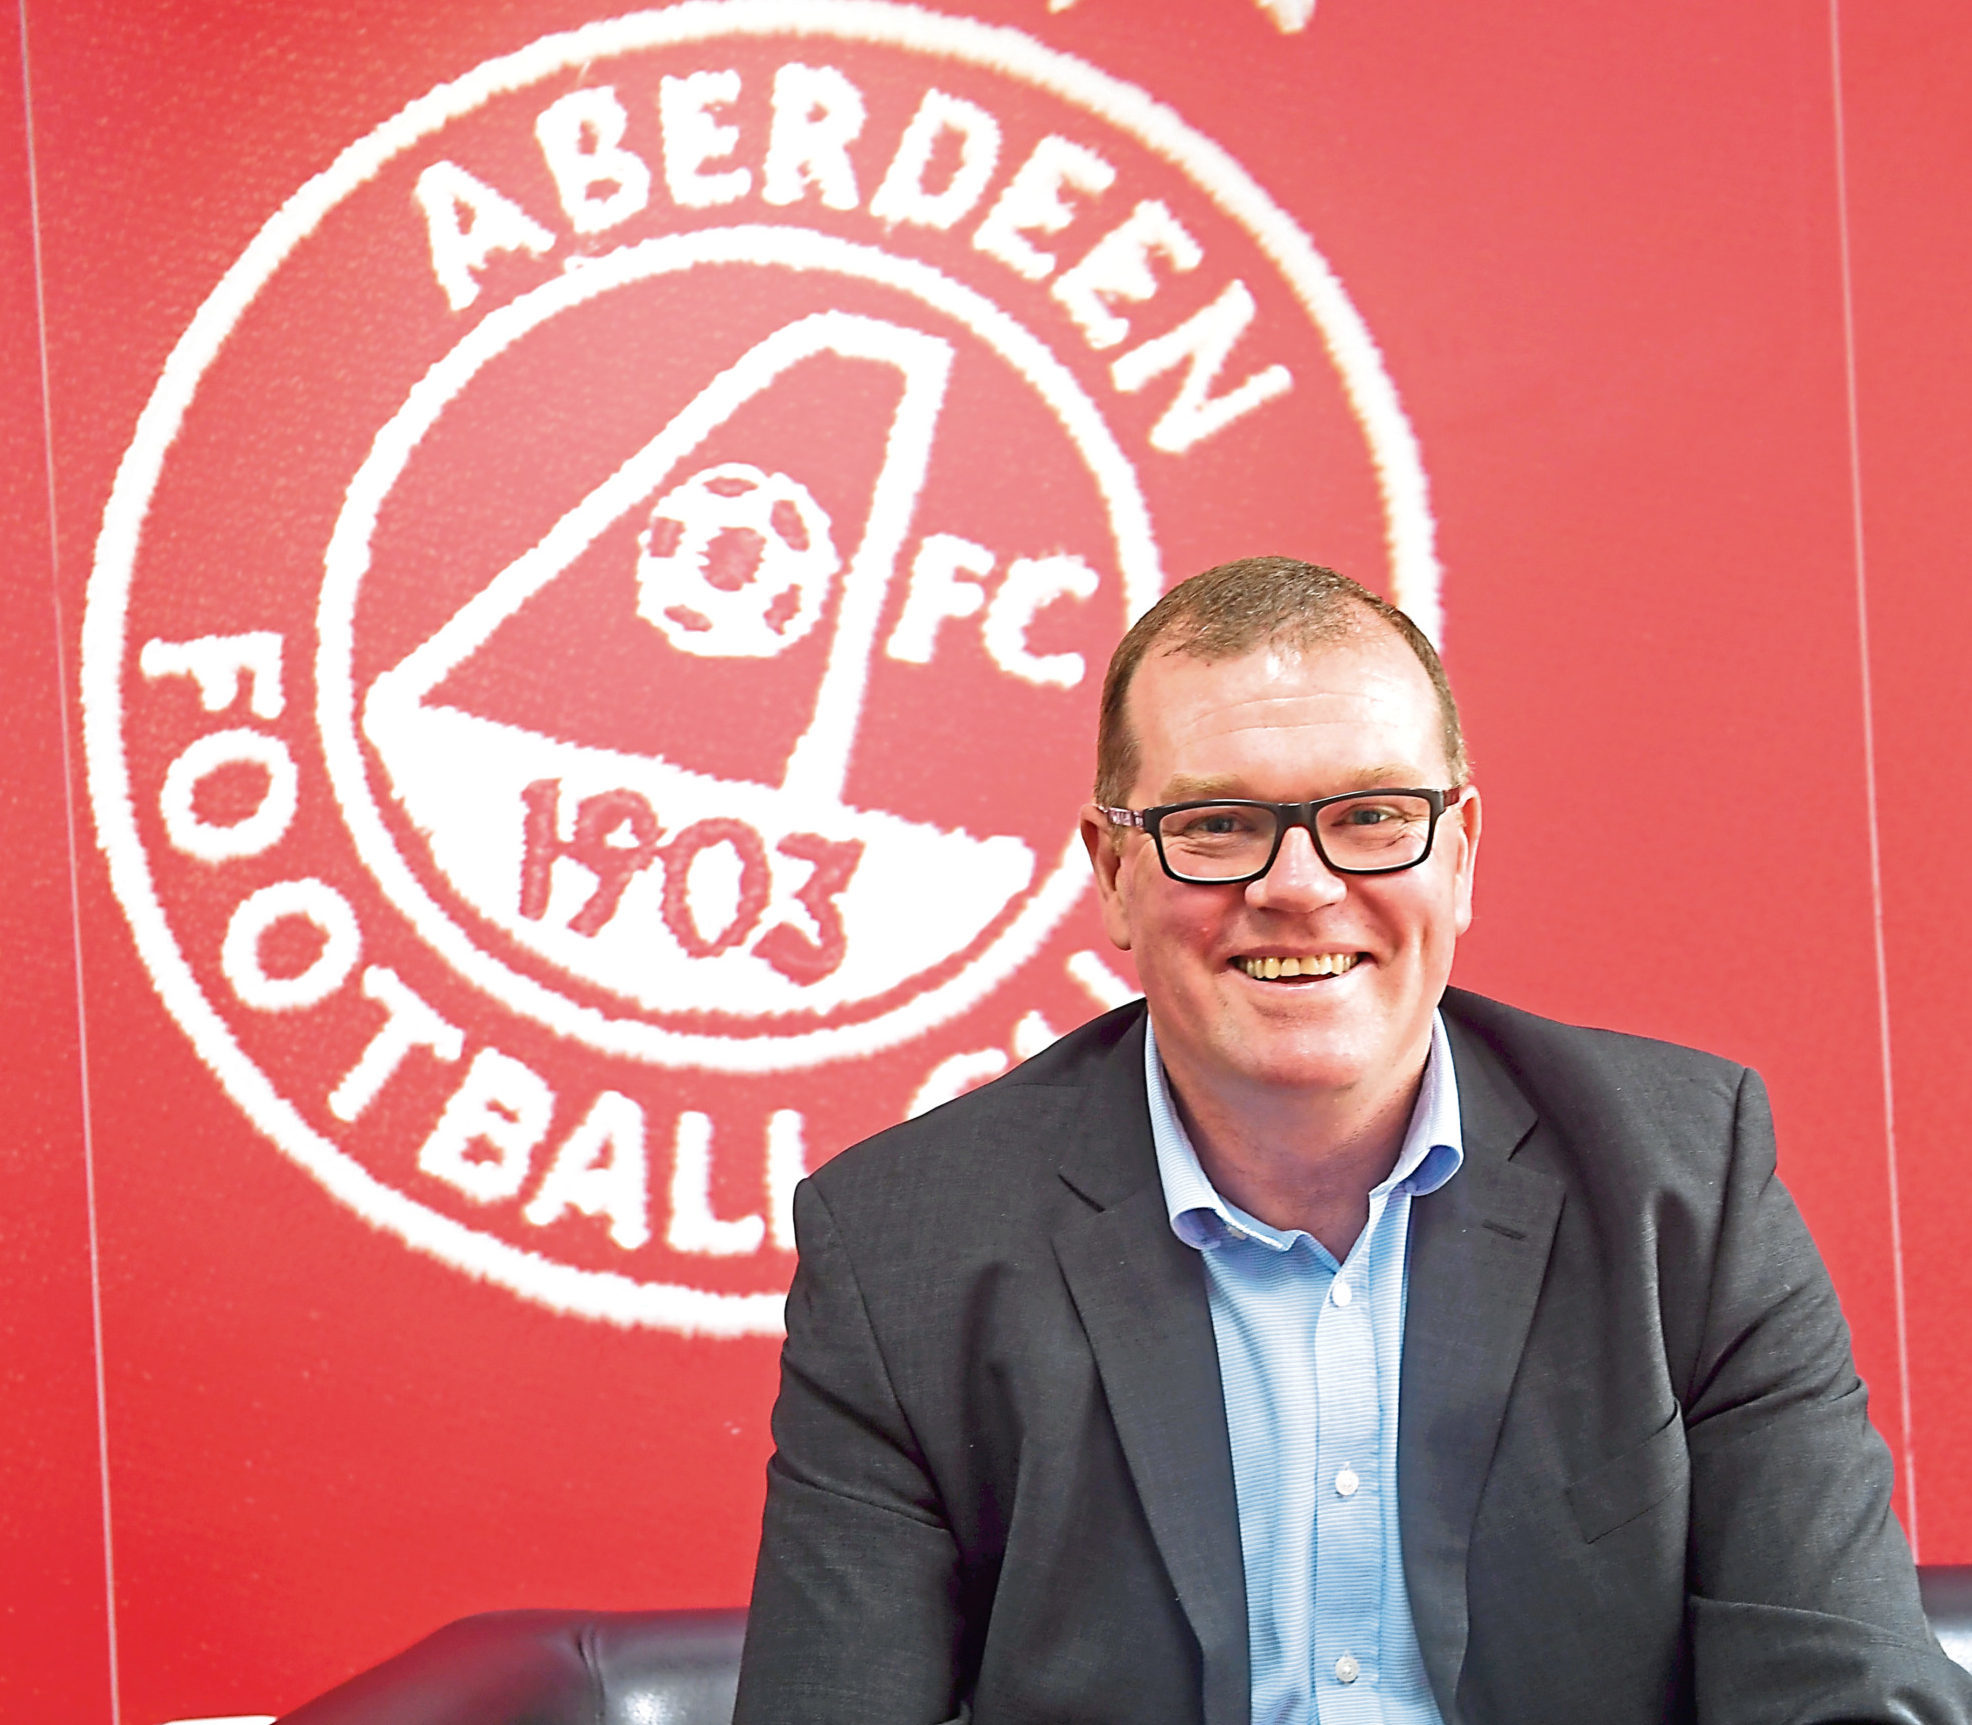 Pictured is Aberdeen FCs Rob Wicks who has been appointed the clubs new commercial director.